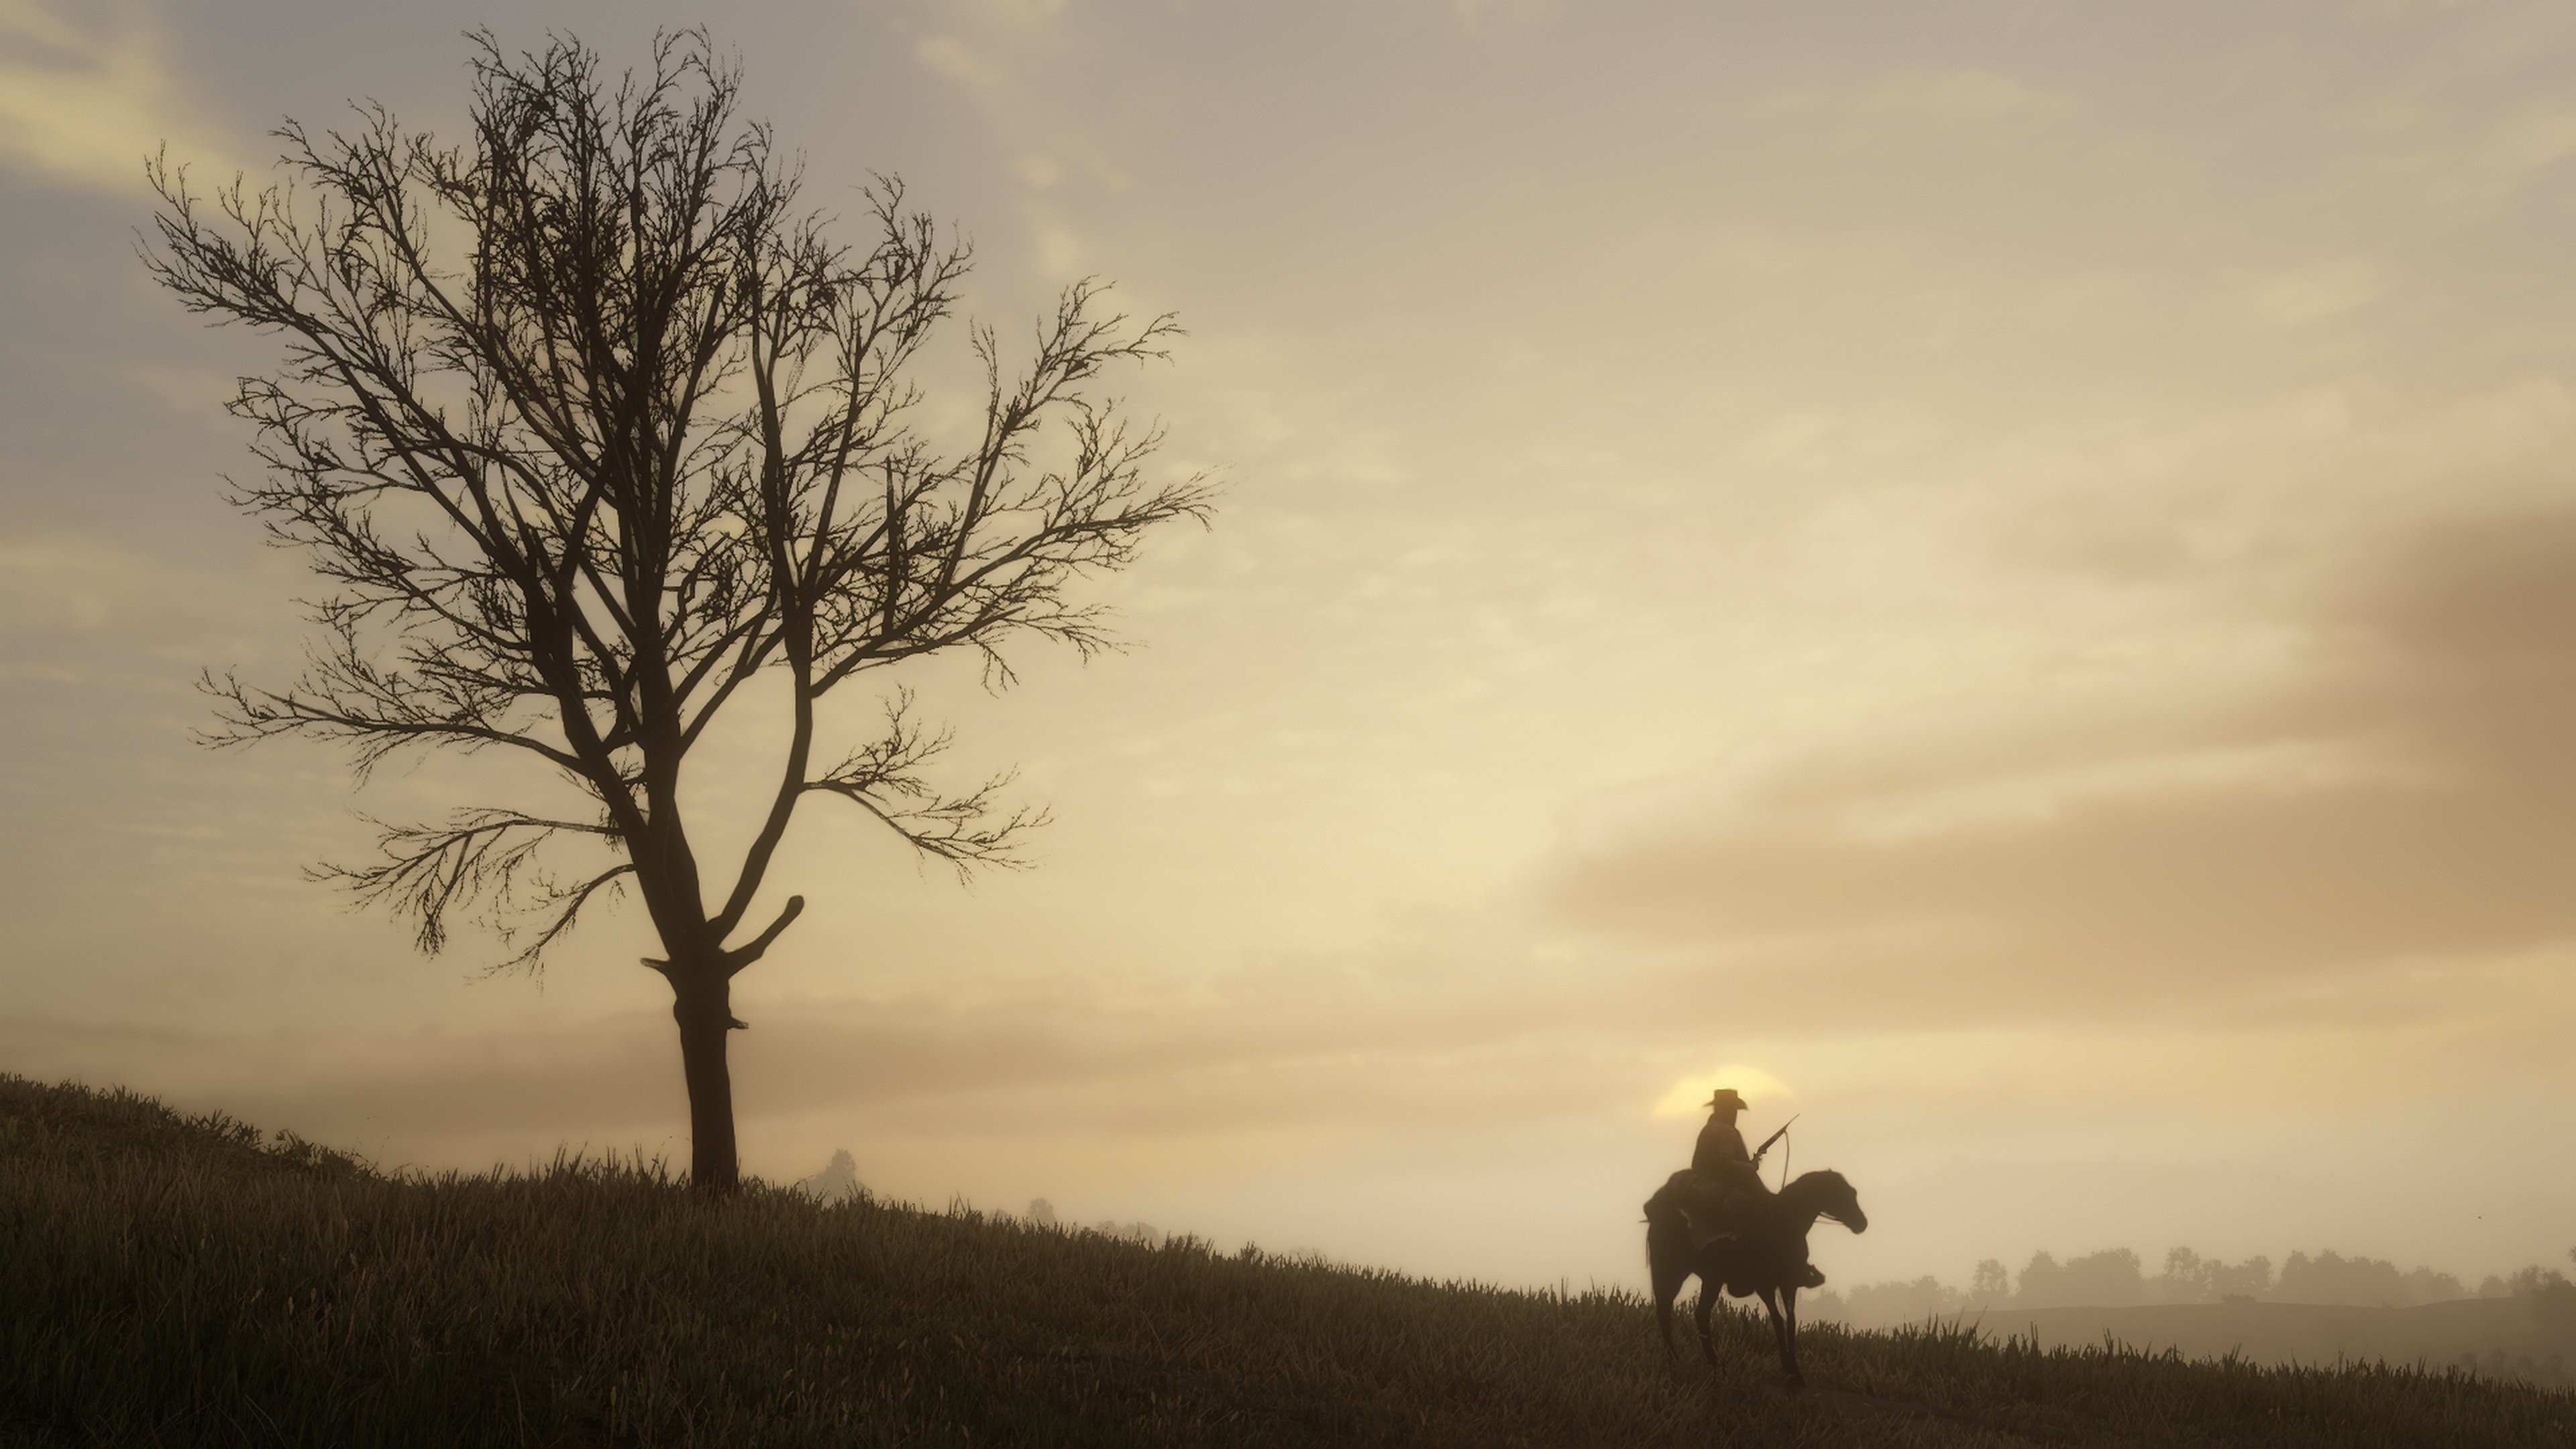 red dead redemption 2, arthur morgan, red dead, video game